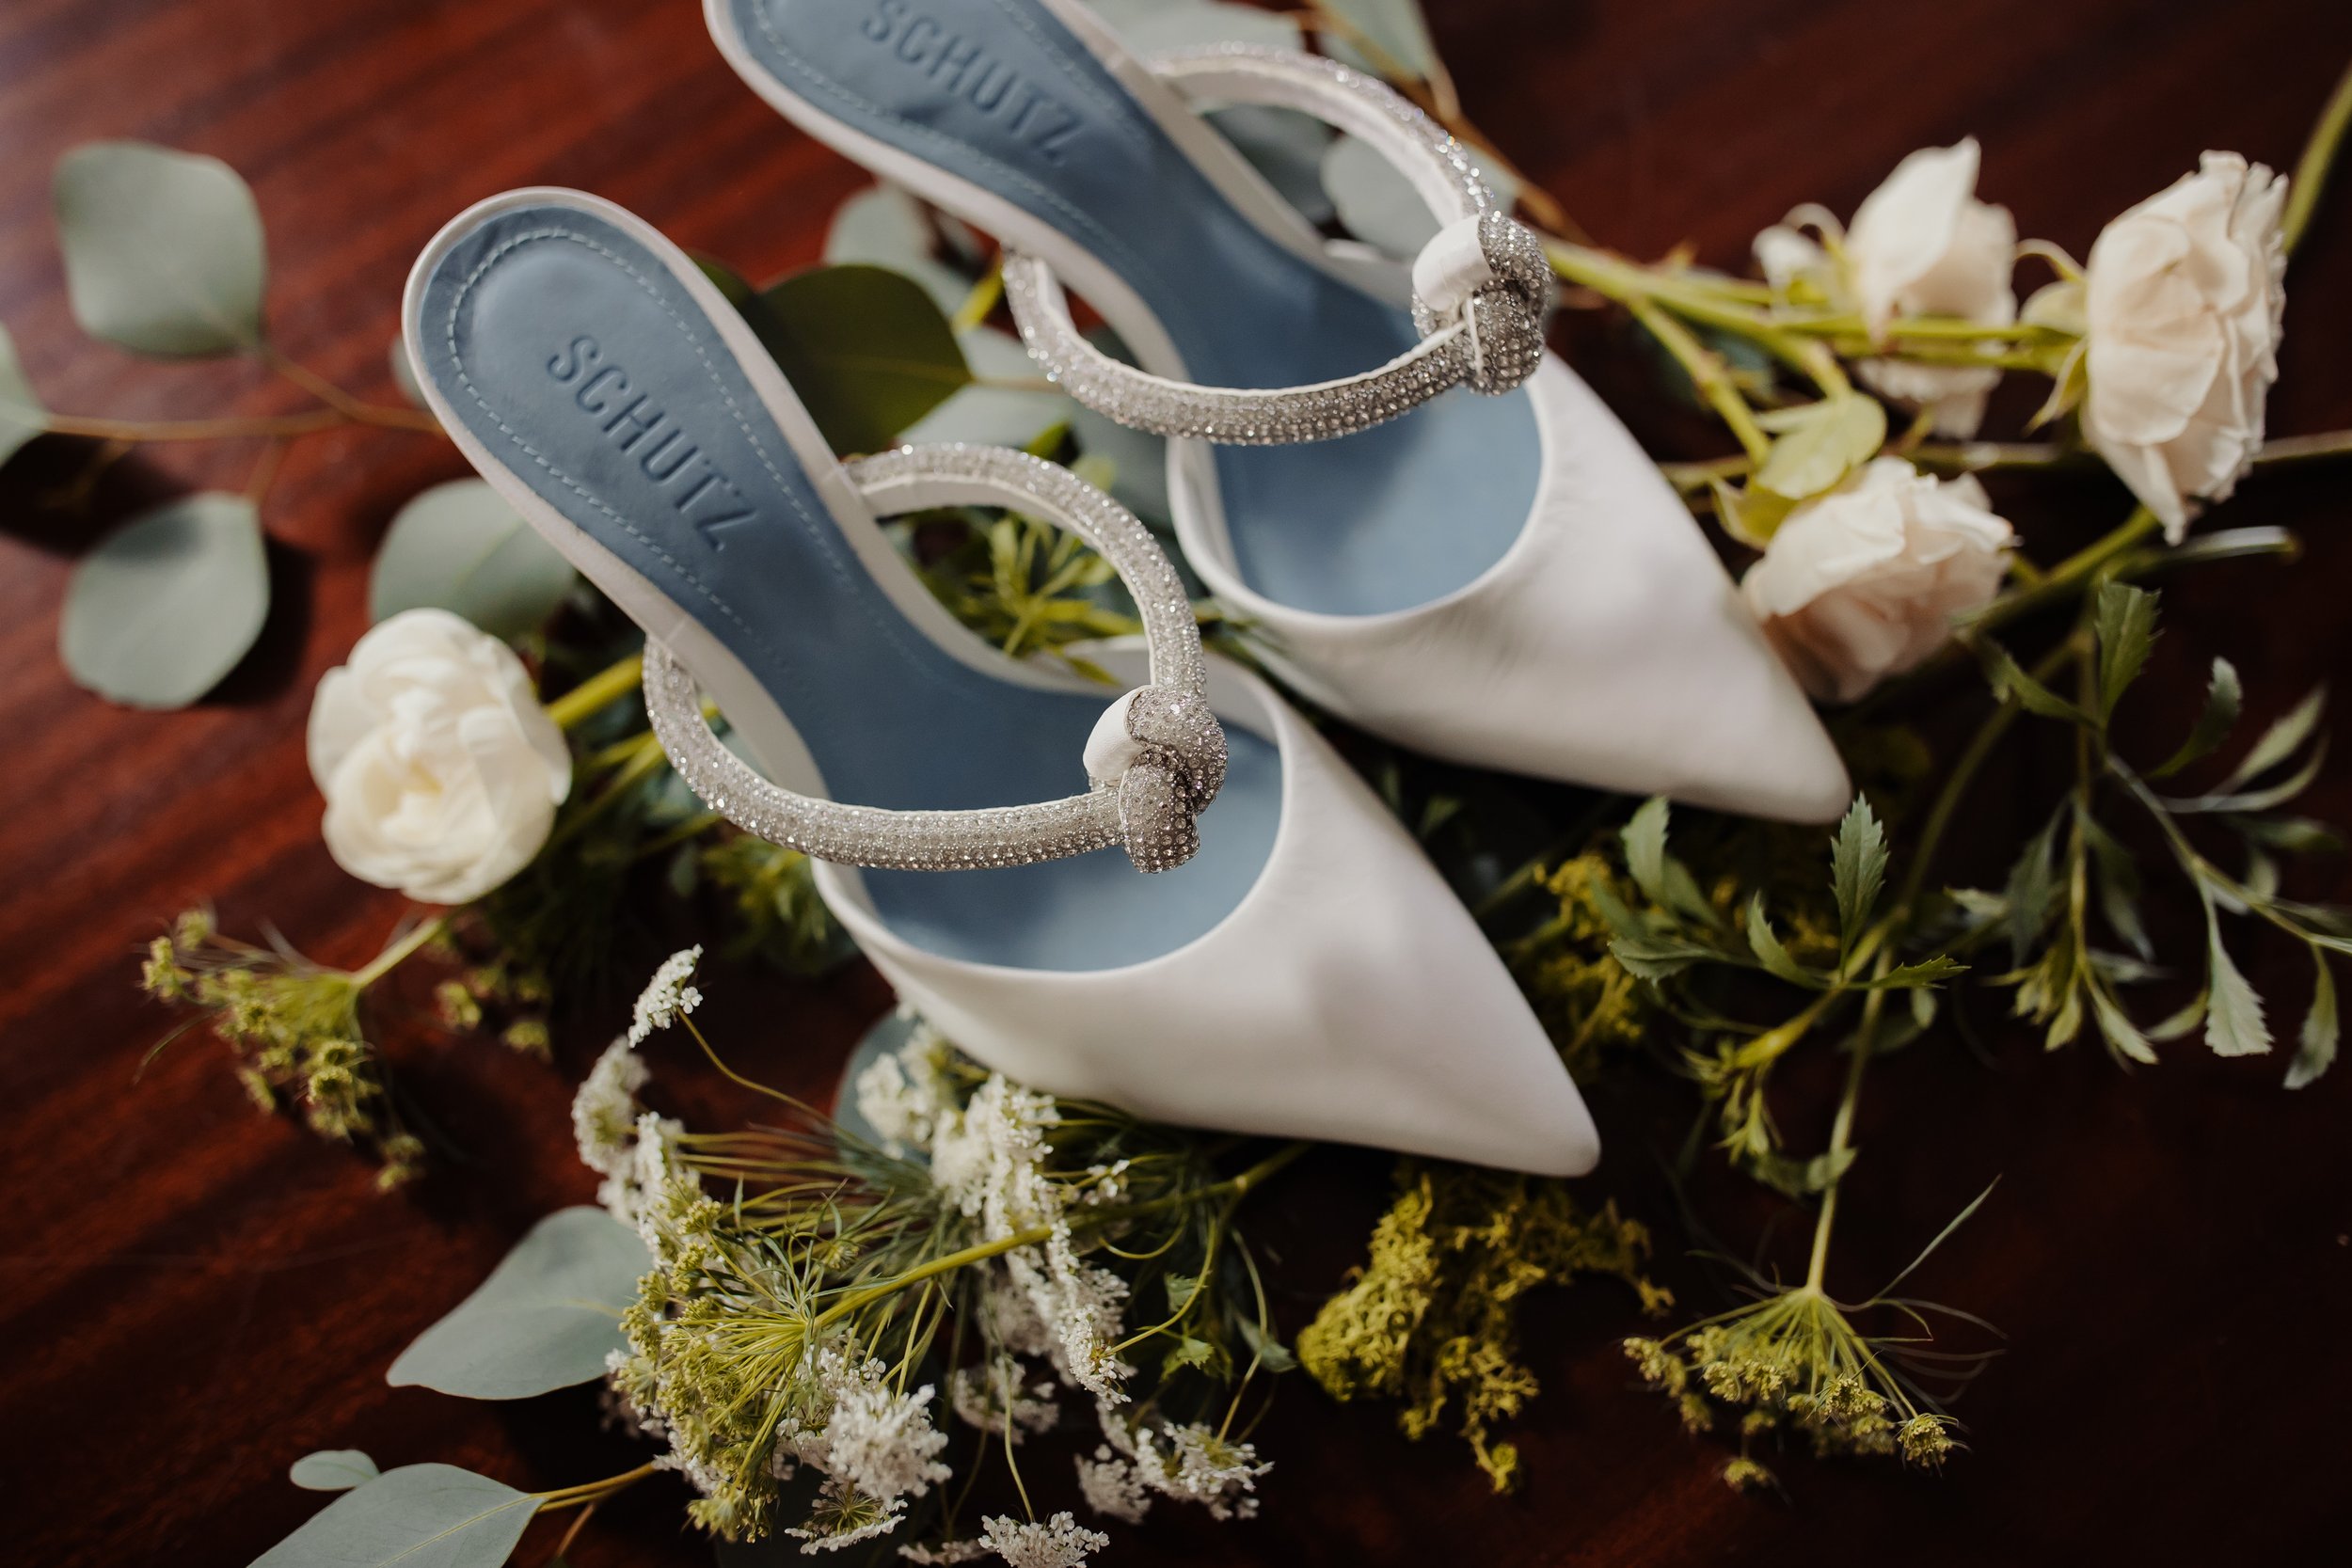  Closeup of a pair of bridal shoes next to some table florals. The shoes are white with light blue insoles. 